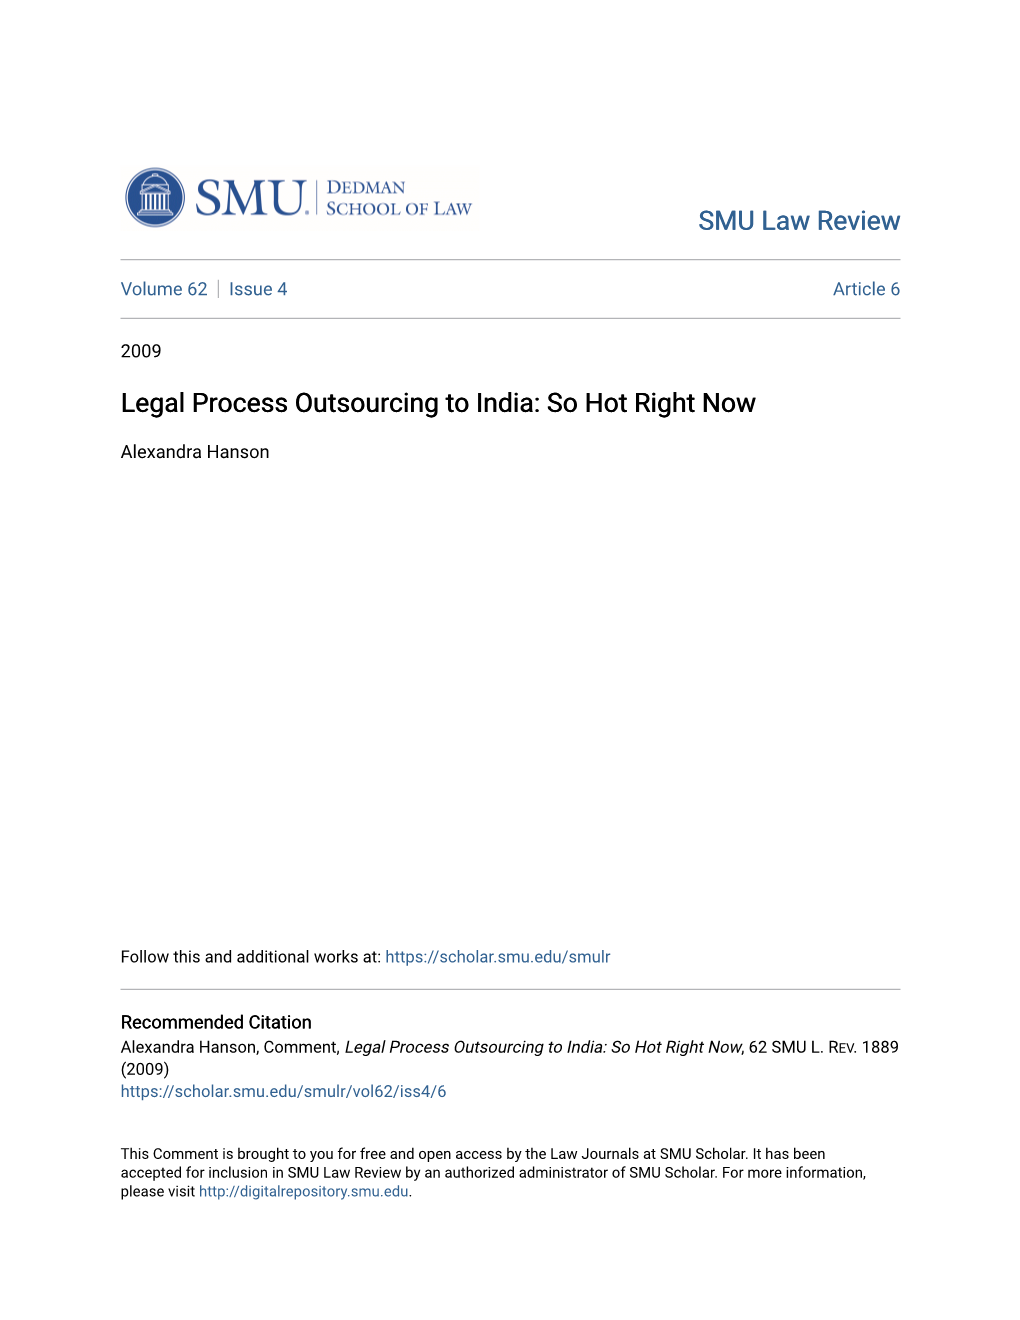 Legal Process Outsourcing to India: So Hot Right Now